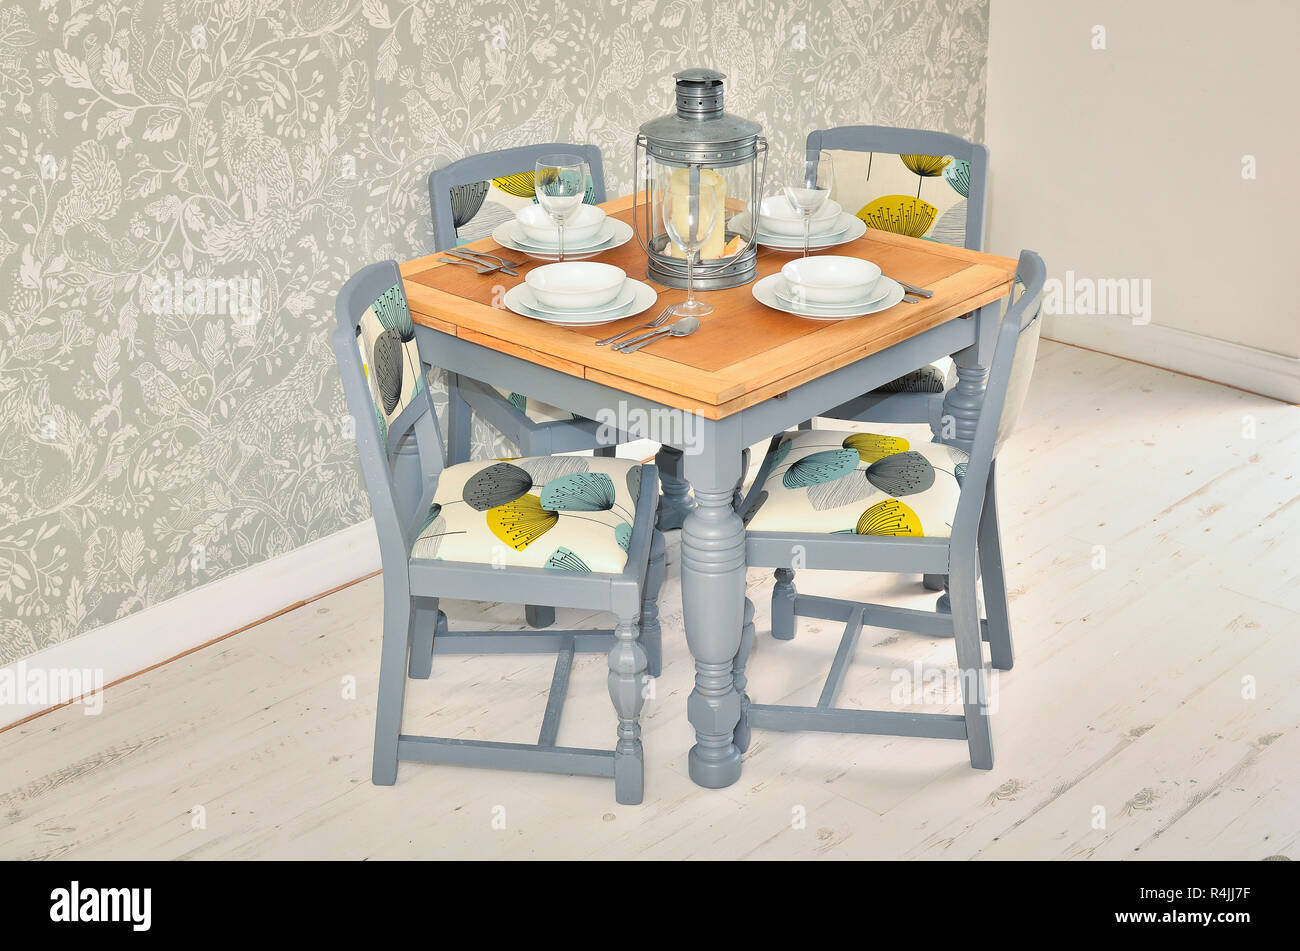 Shabby Chic Dining Table With Chairs And Tableware Stock